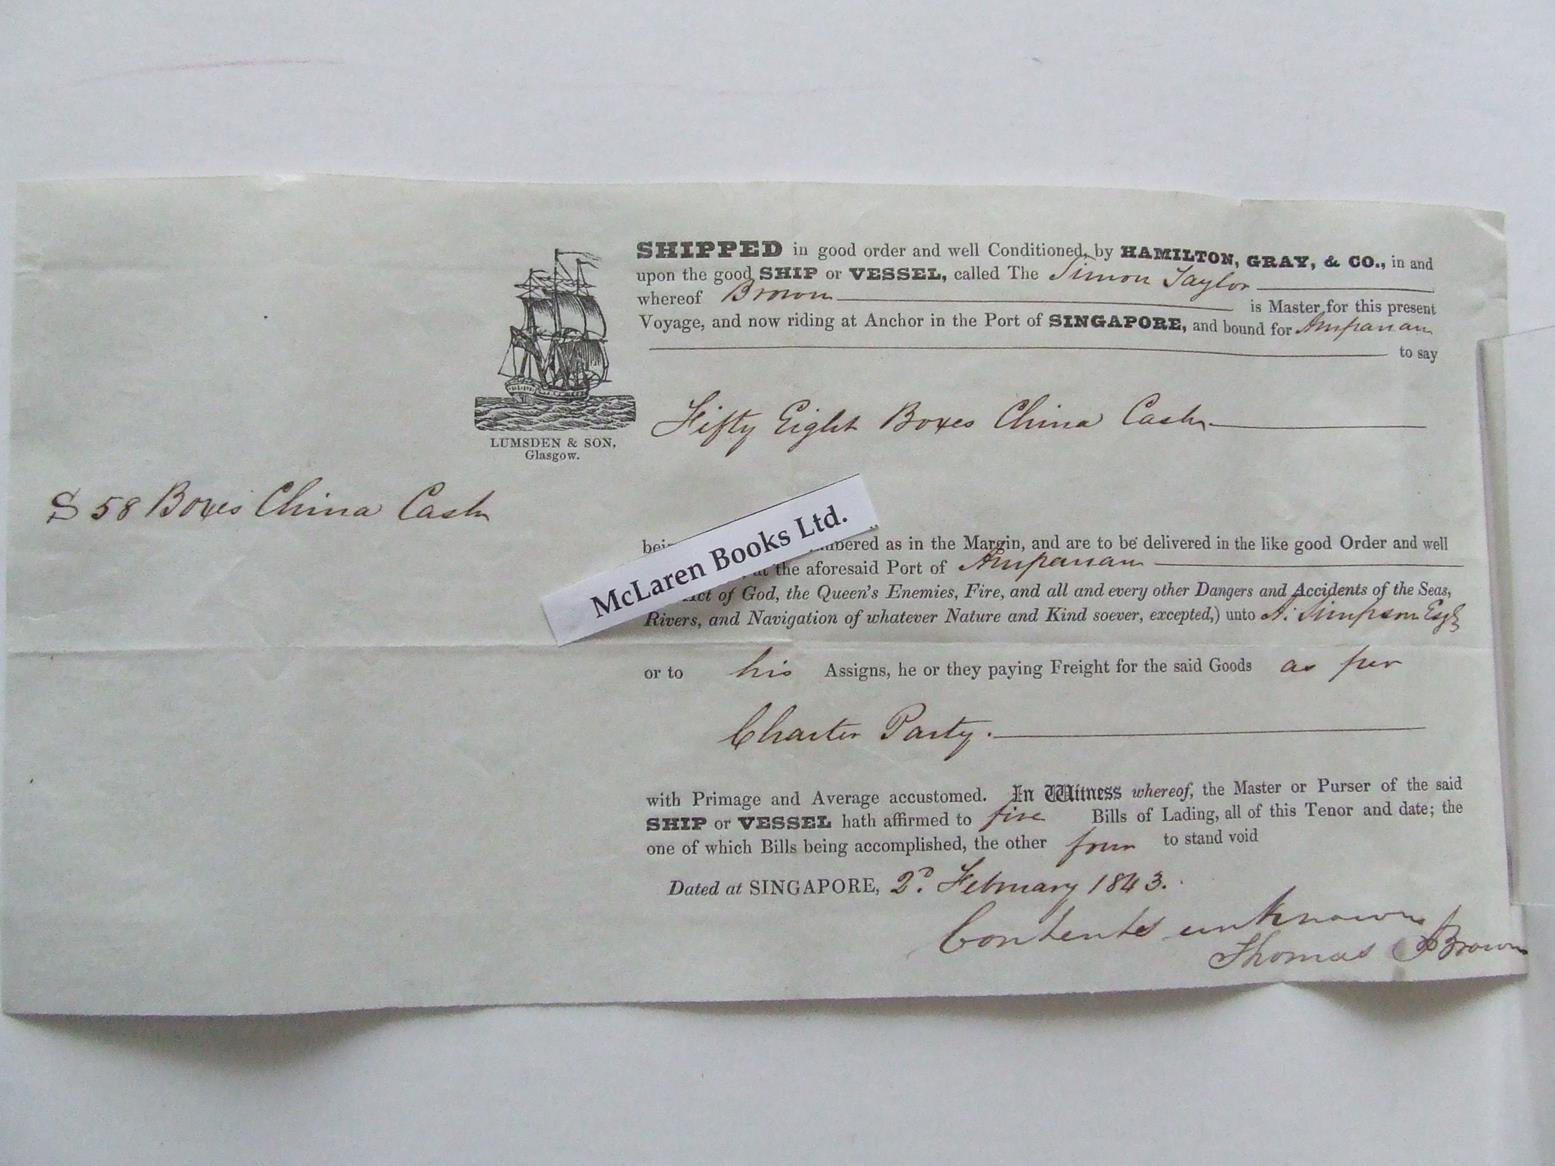 19th century bill of lading for a cargo bound for Ampanan from Singapore